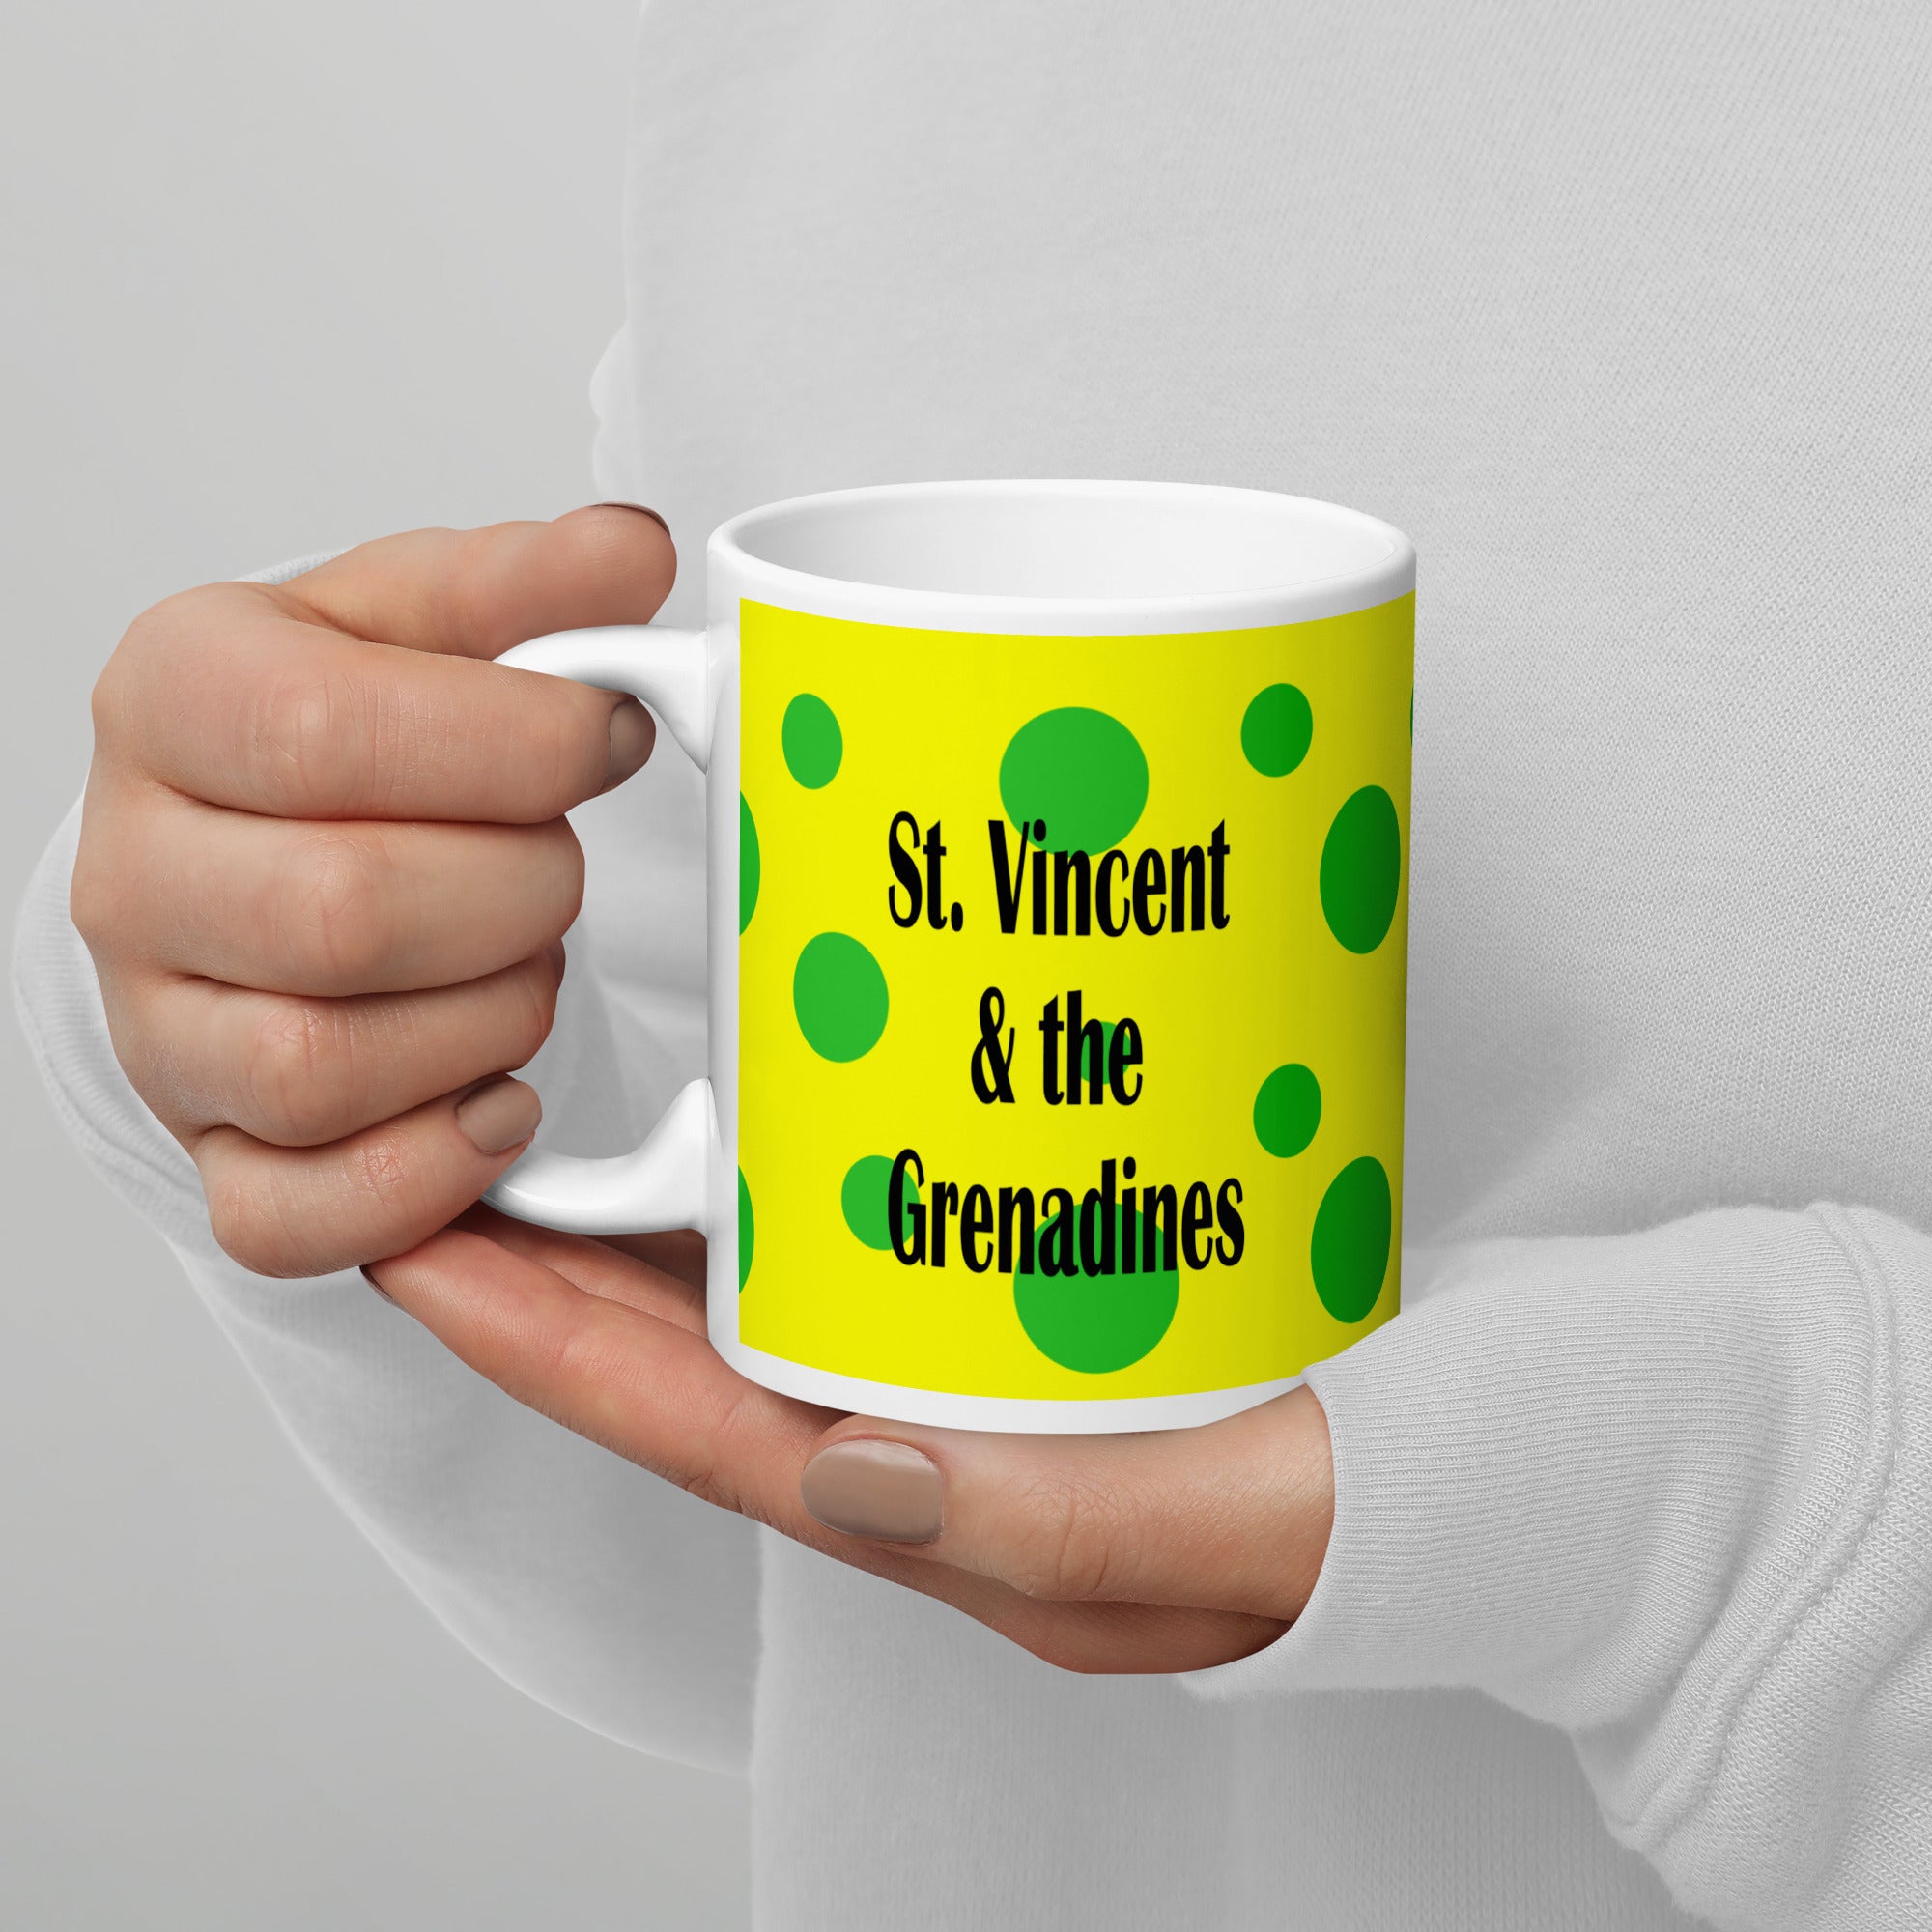 11oz St. Vincent and the Grenadines ceramic mug with green spots on a yellow background